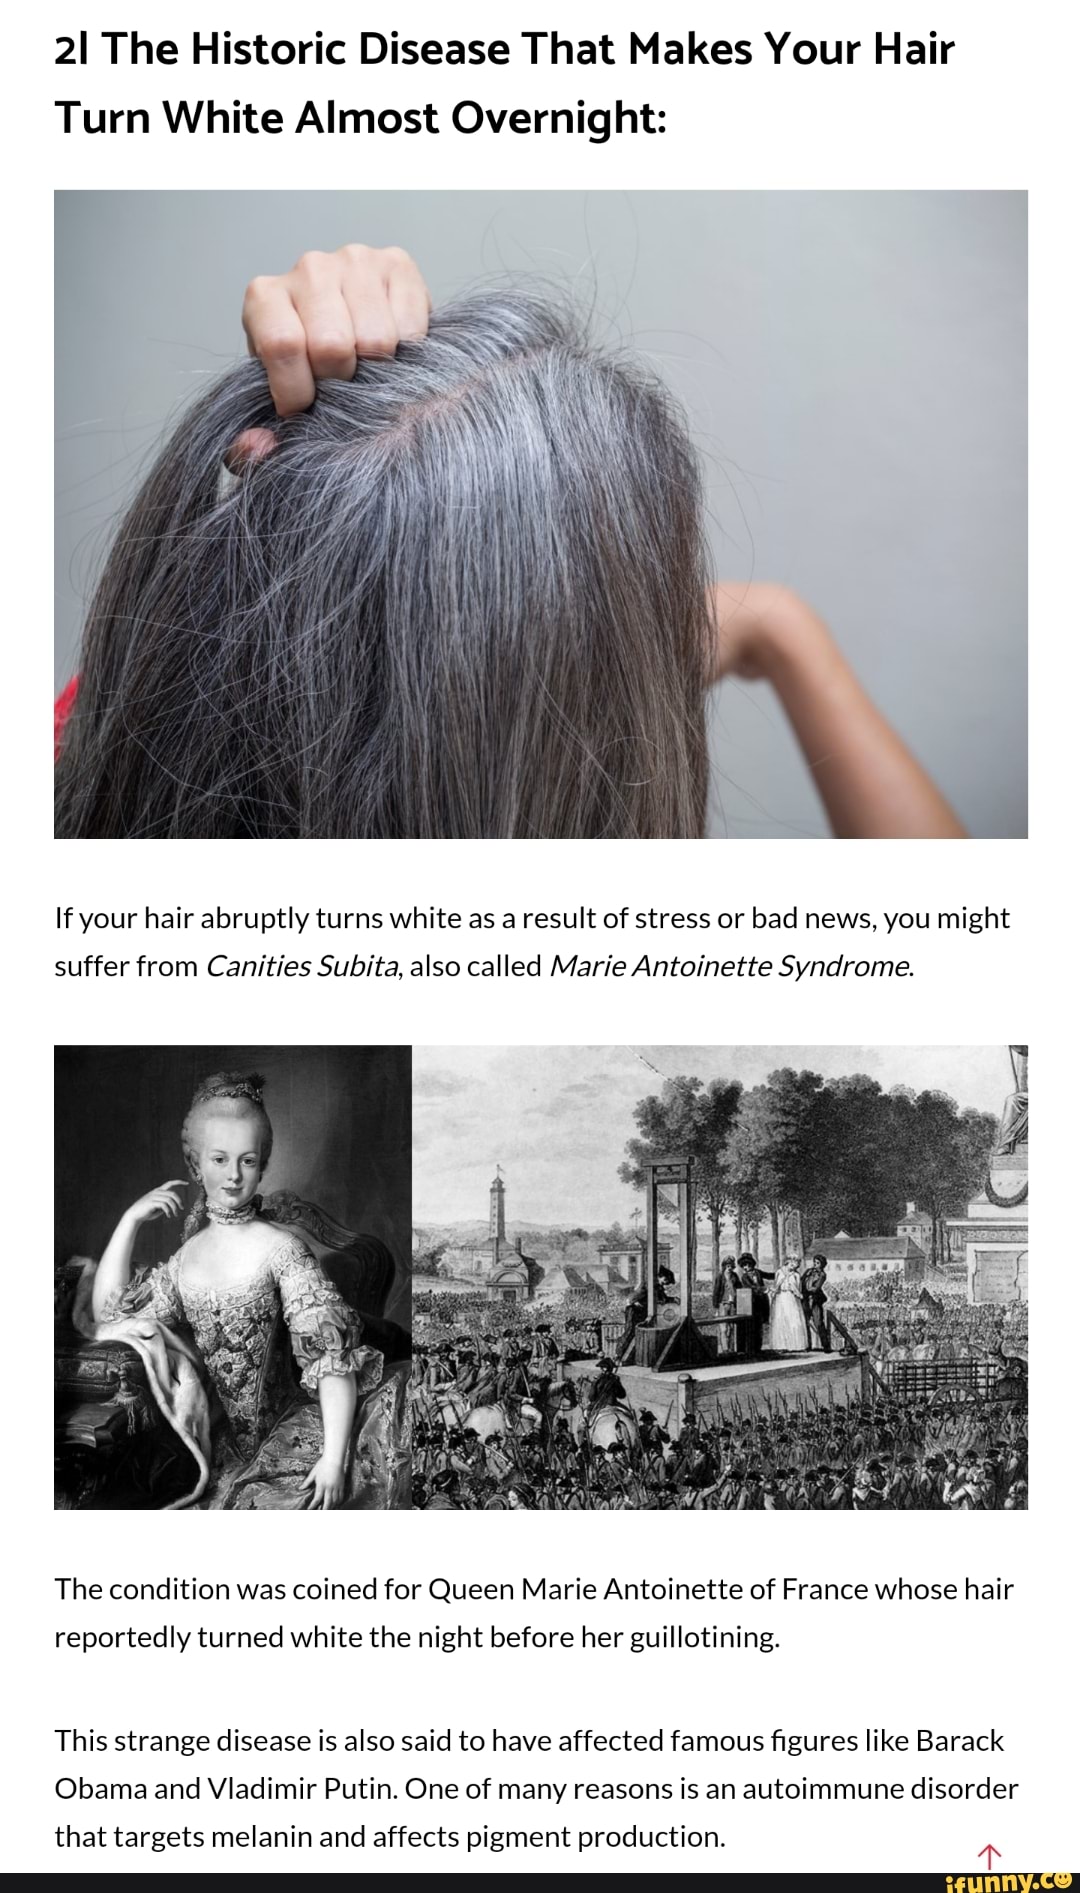 21 The Historic Disease That Makes Your Hair Turn White Almost Overnight:  If your hair abruptly